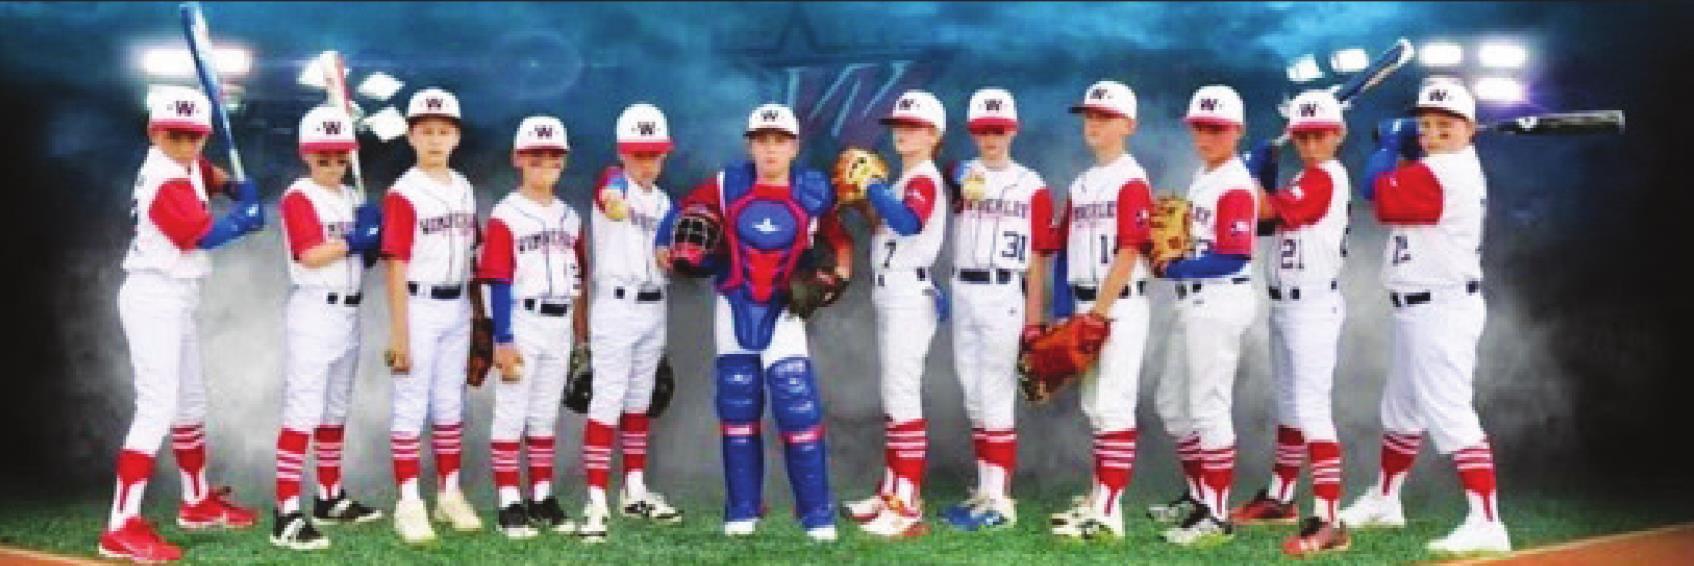 WYSA baseball finds success with All-Stars | Wimberley View